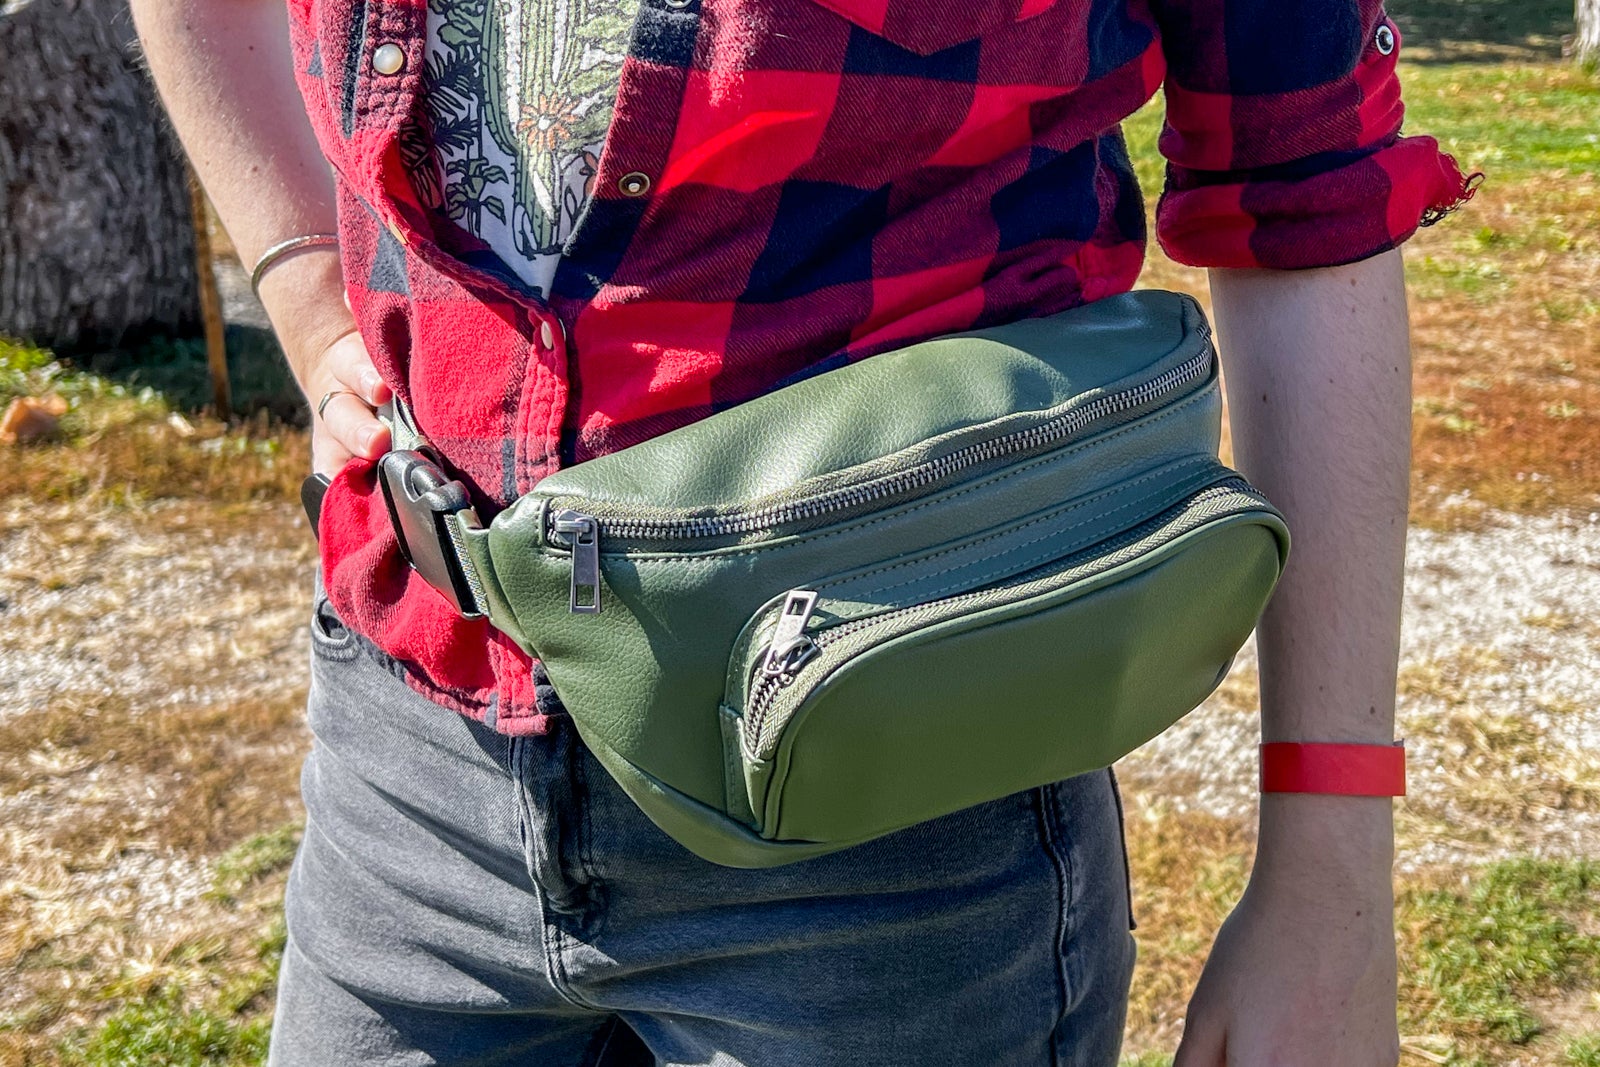 These are the 11 best travel fanny packs for easy, hands-free travel